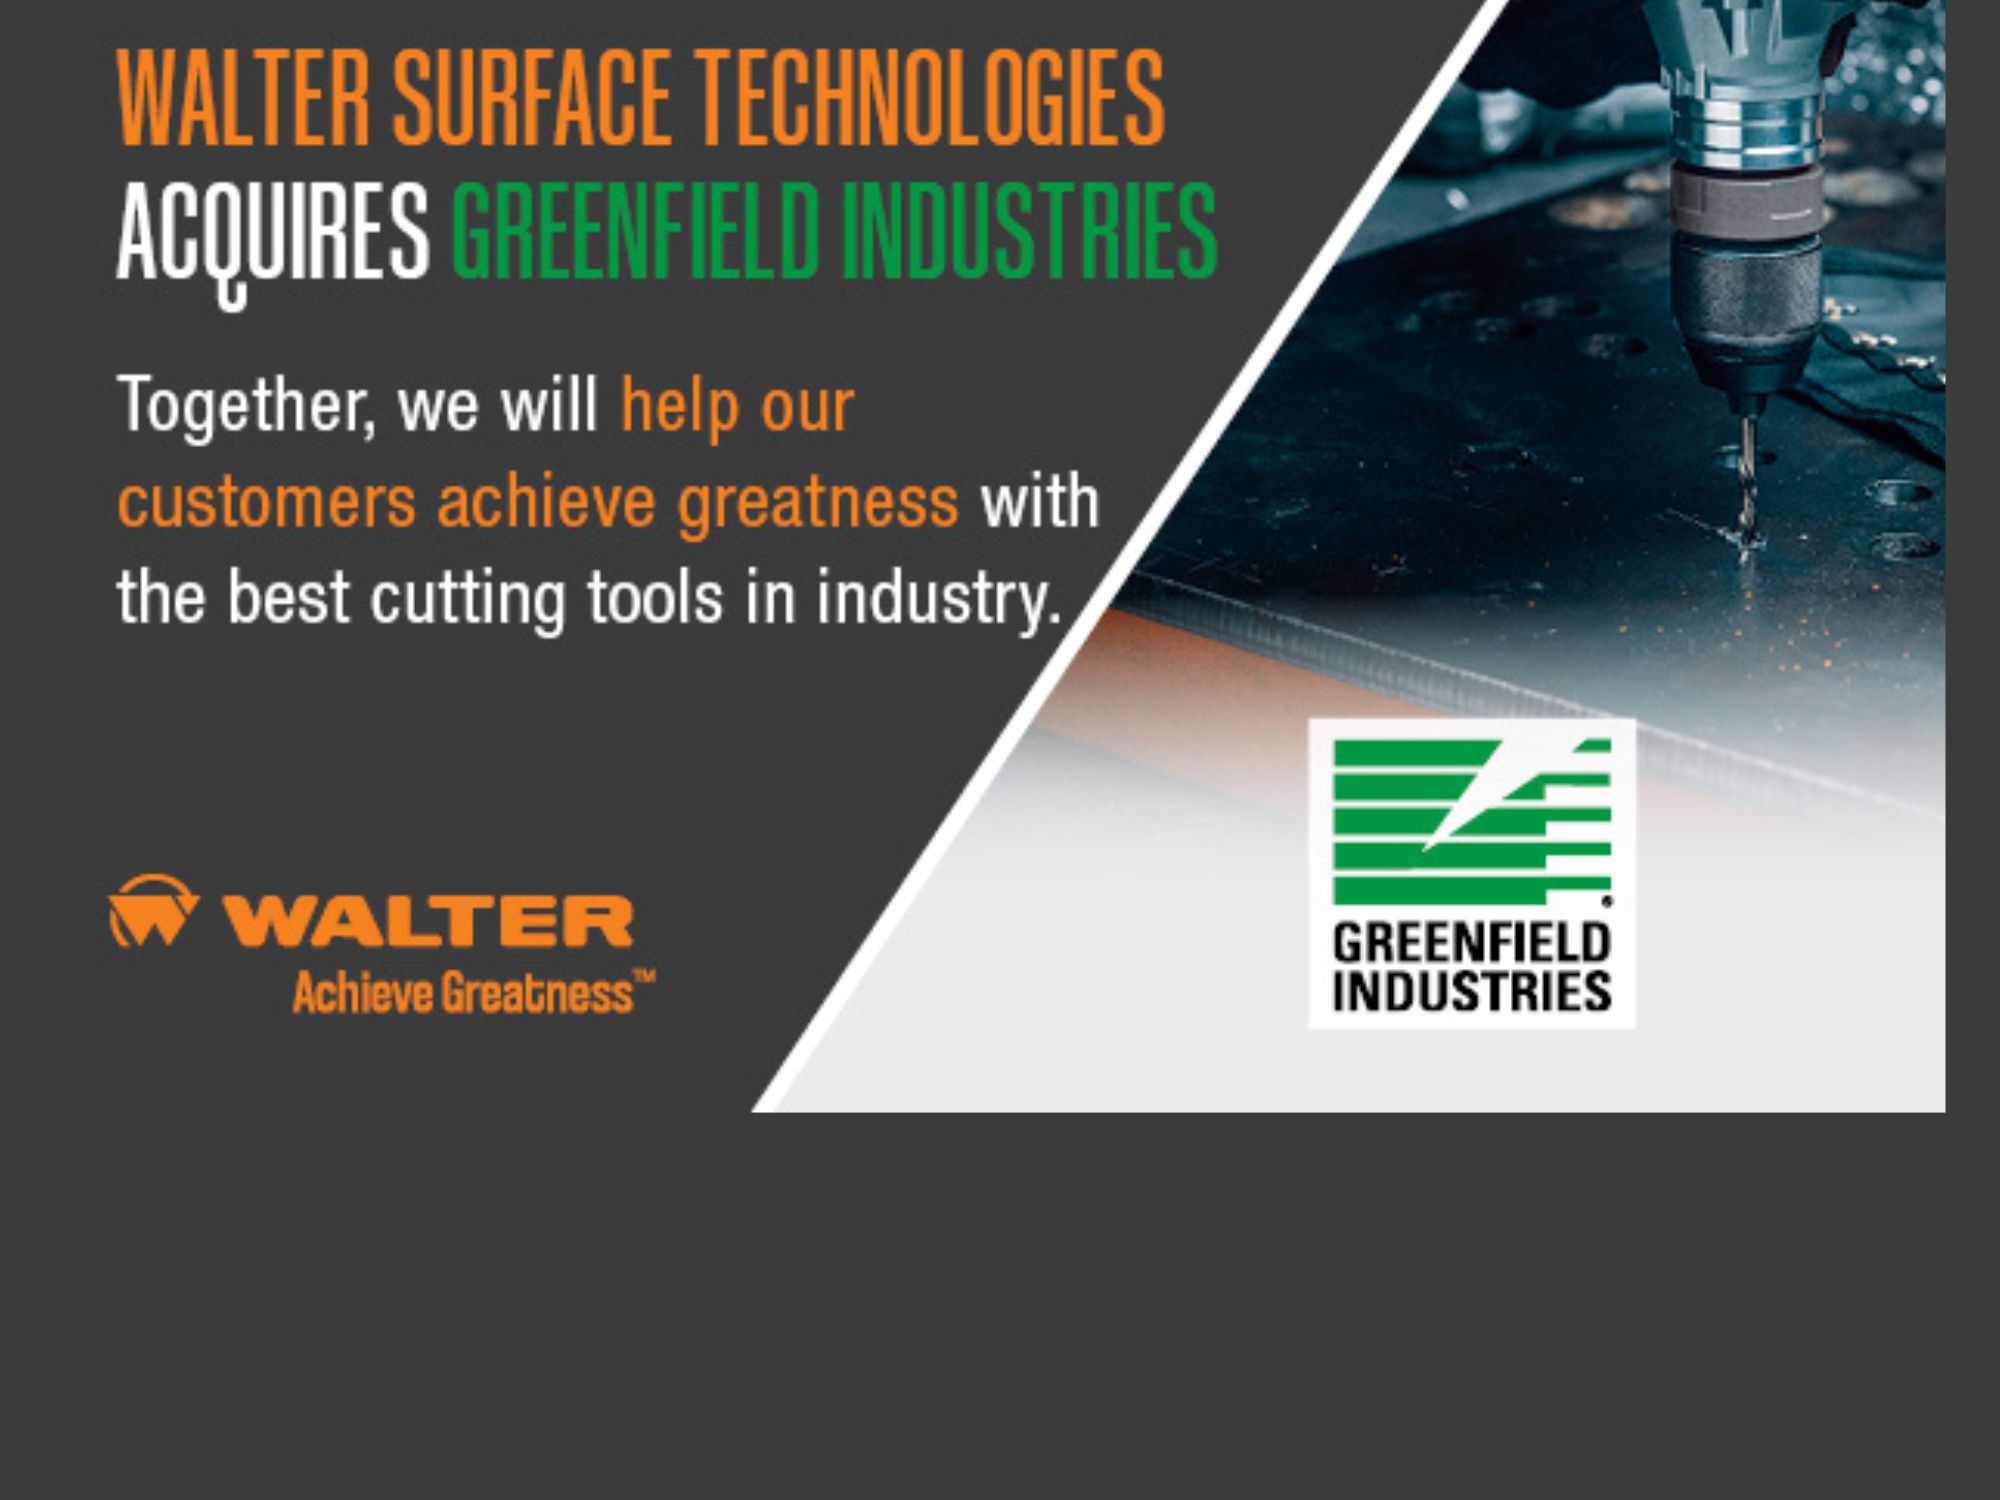 WALTER Acquires Greenfield Industries